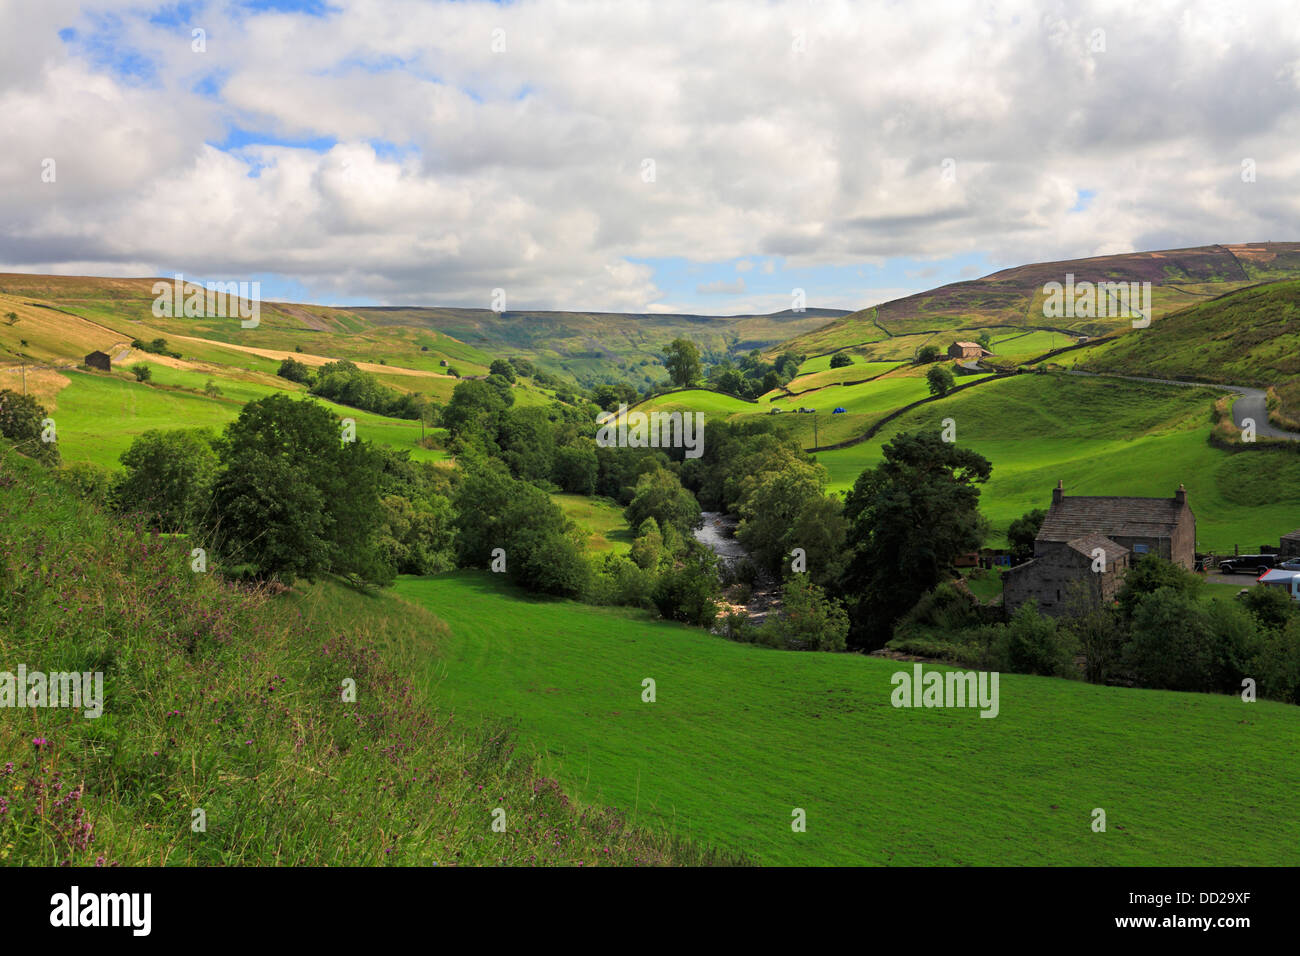 Il fiume Swale in Swaledale vicino Keld, North Yorkshire, Yorkshire Dales National Park, Inghilterra, Regno Unito. Foto Stock